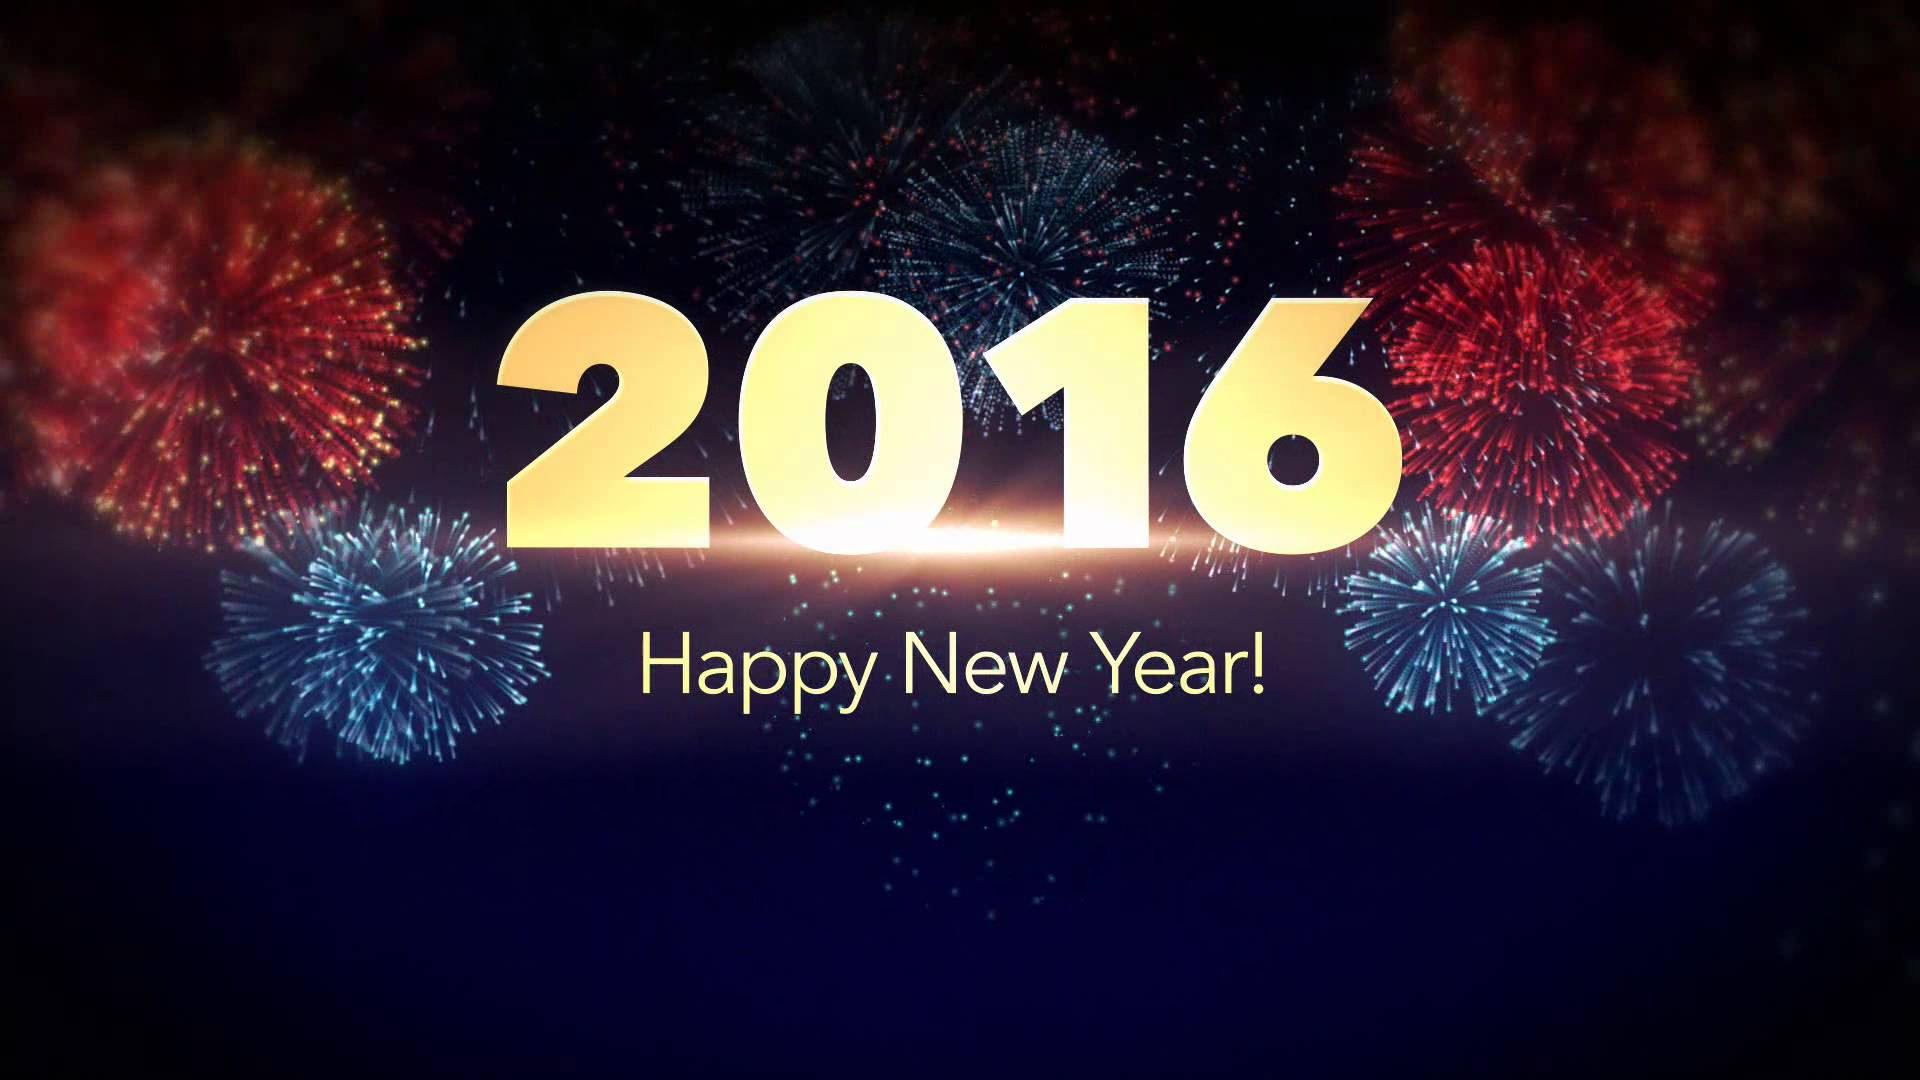 Happy New Year 2016 Wallpapers Images Download {HD 50+} | Happy ...